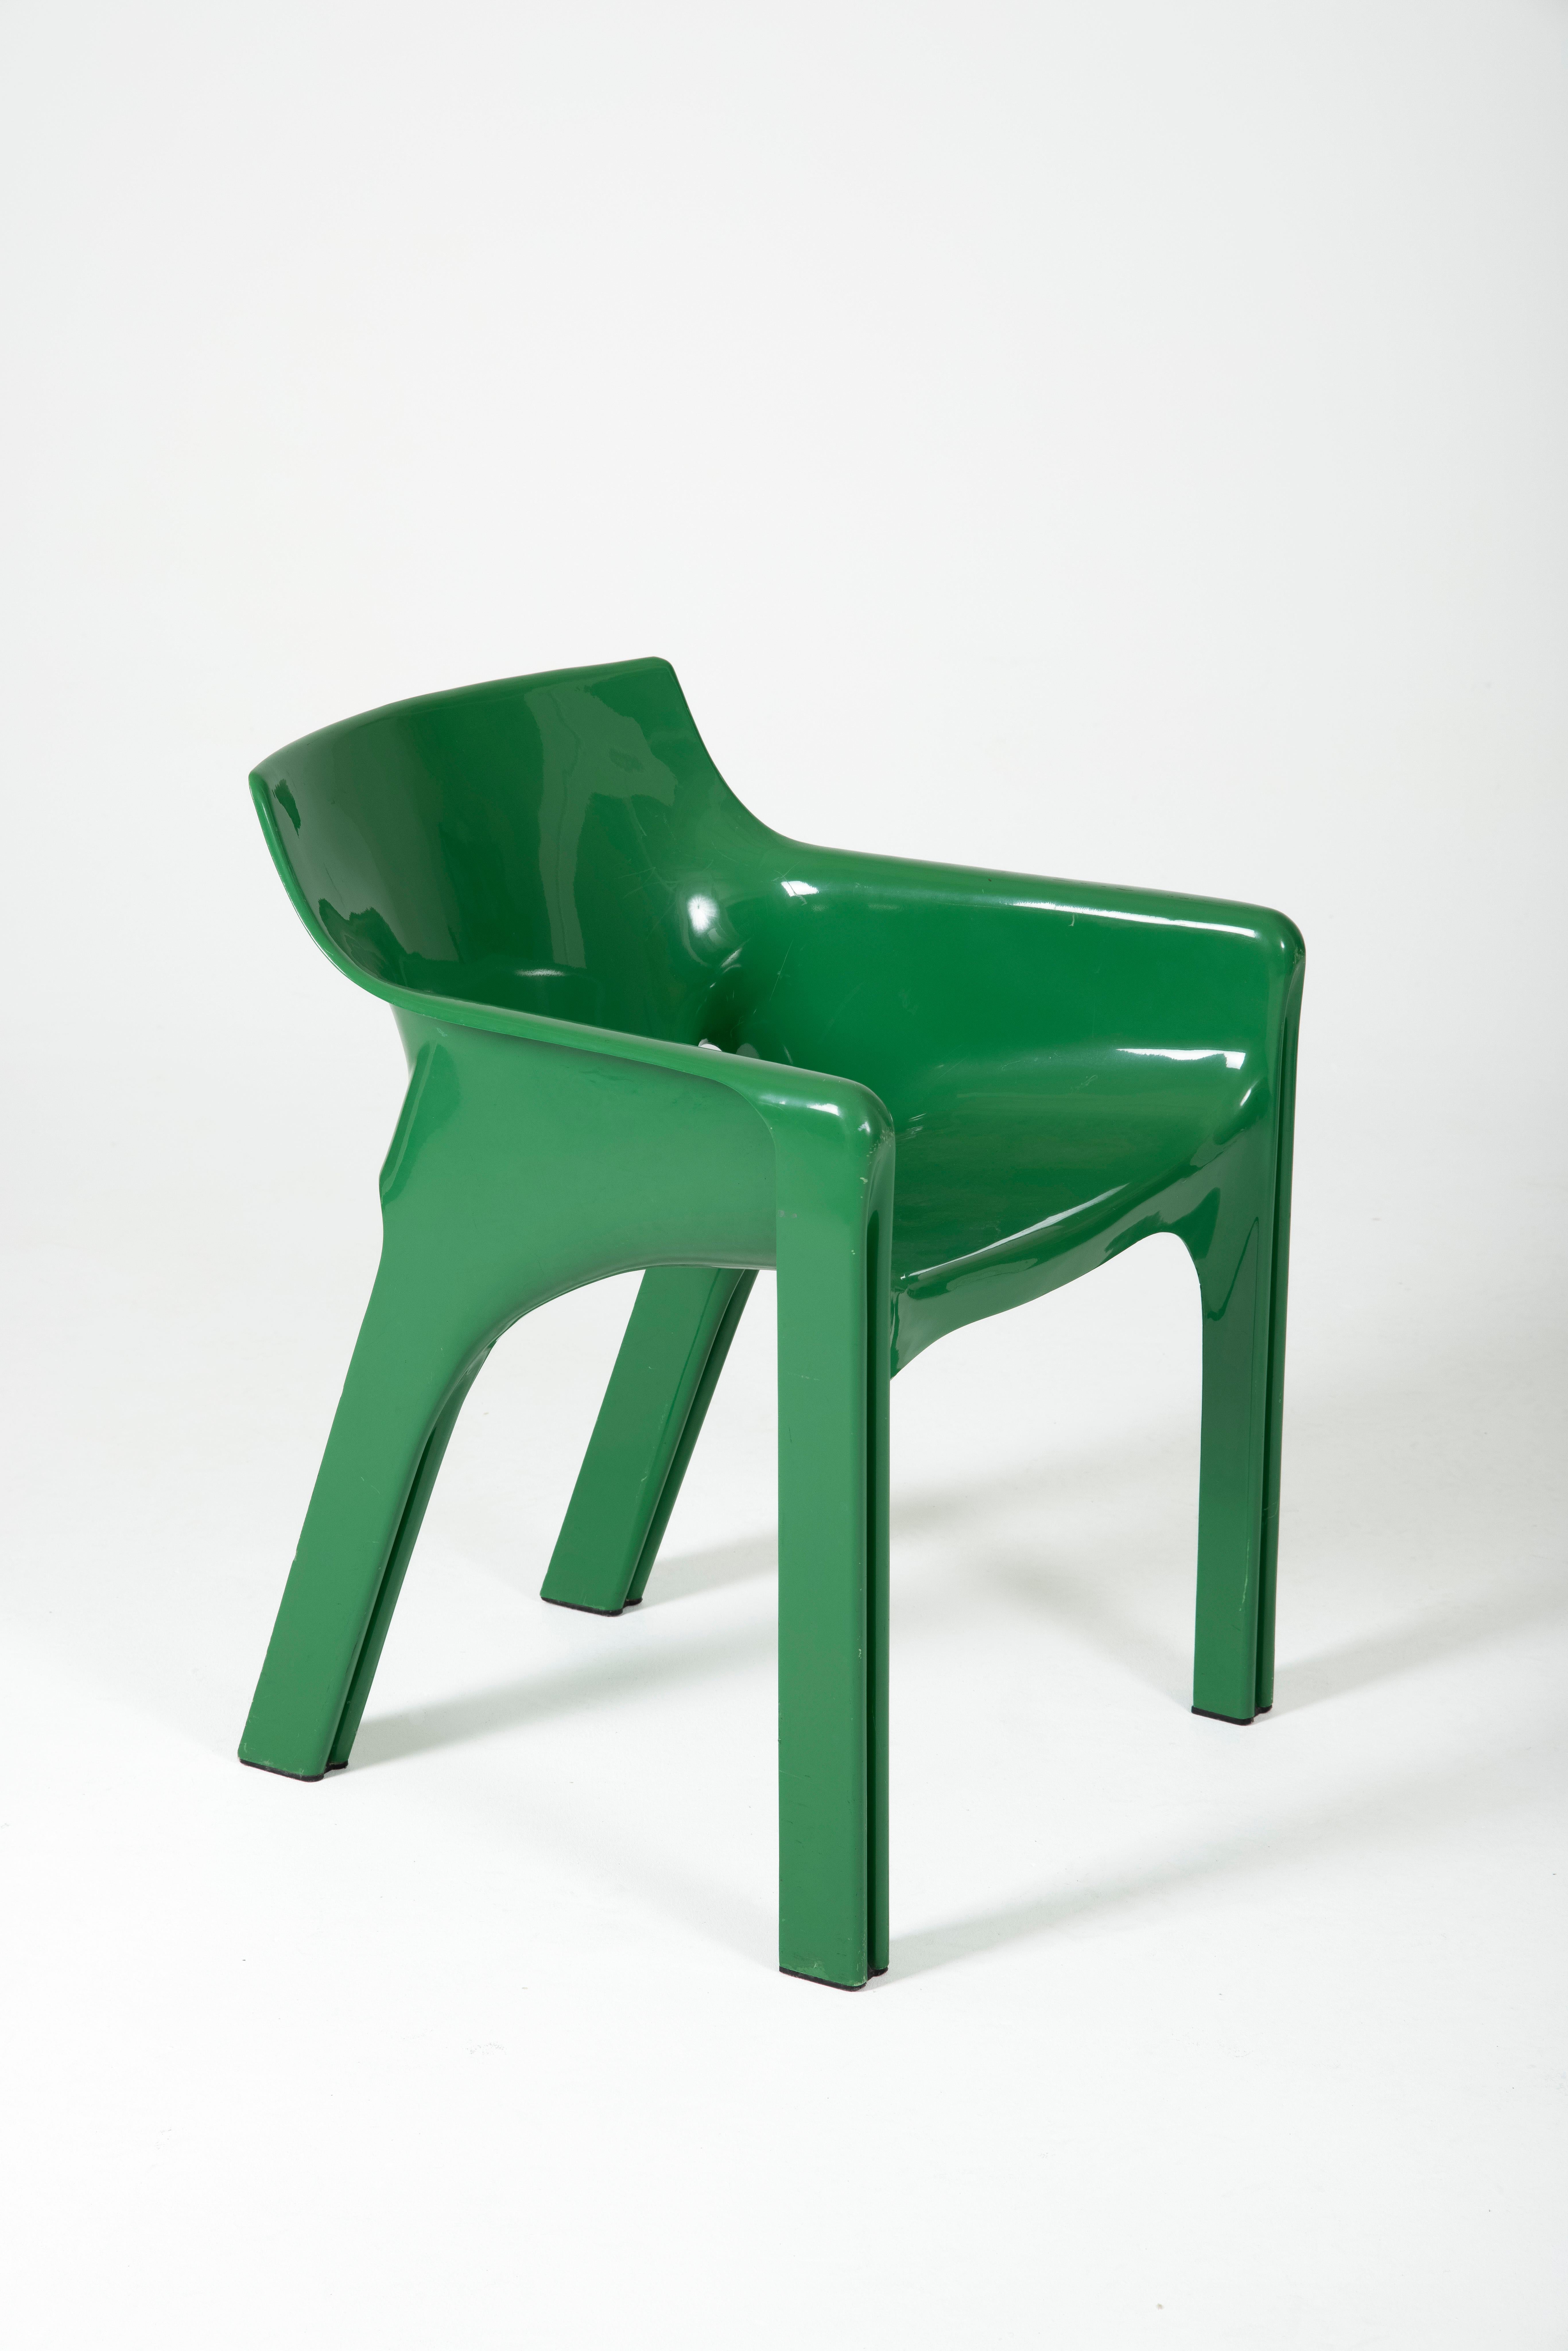 Chair model Gaudi designed by Vico Magistretti. Manufactured in the 1970s in Italy by Artemide. In molded plastic. Very good vintage condition. Stamp present.